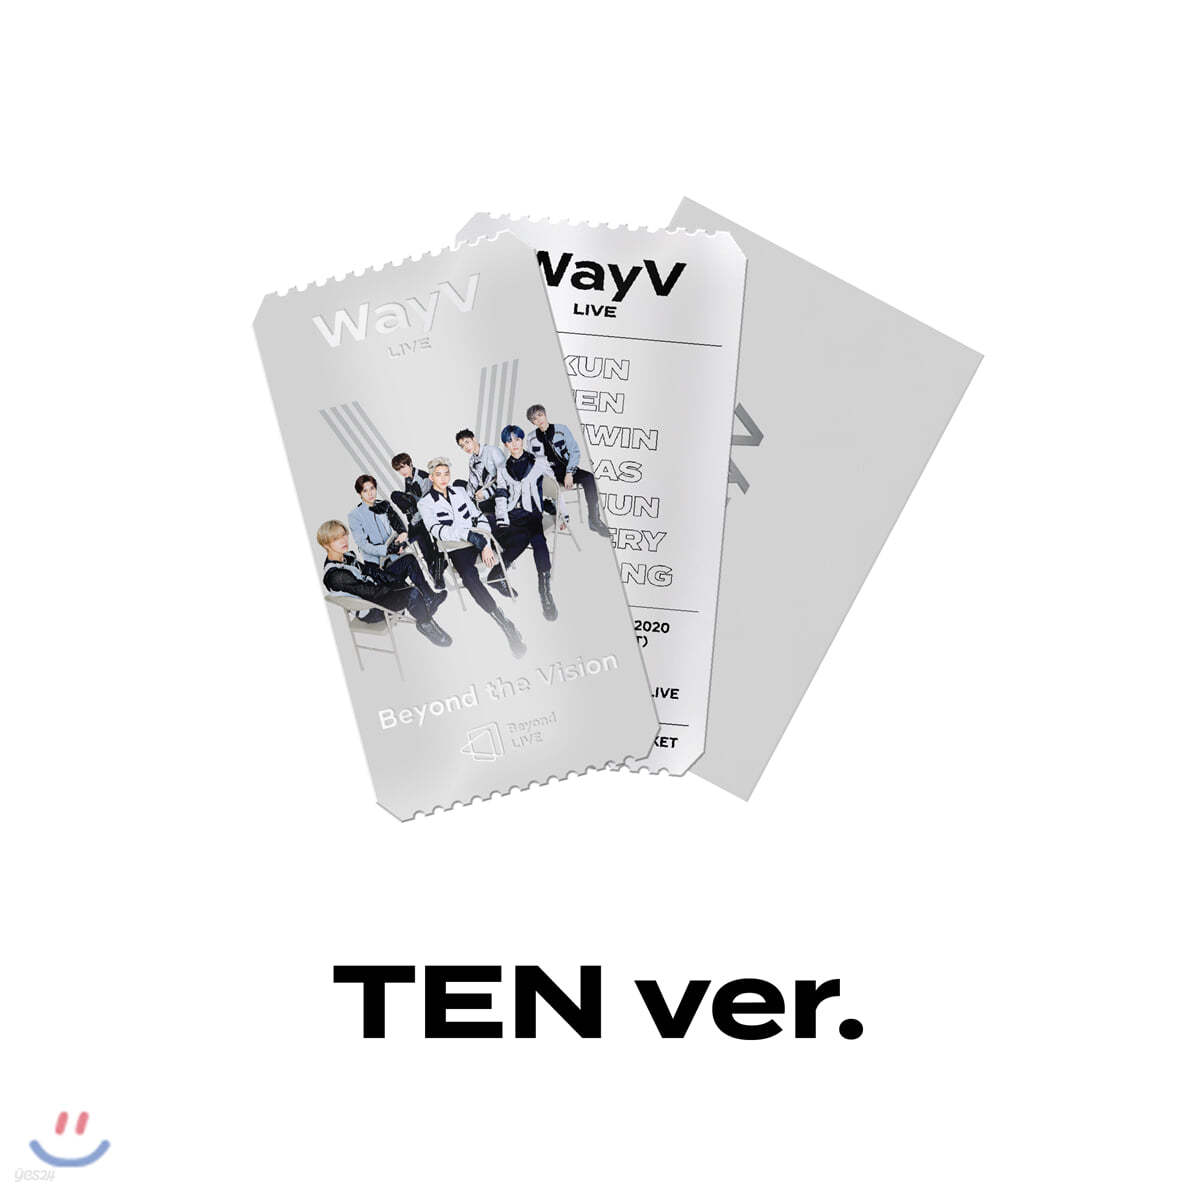 [TEN] WayV Beyond LIVE Beyond the Vision SPECIAL AR TICKET SET